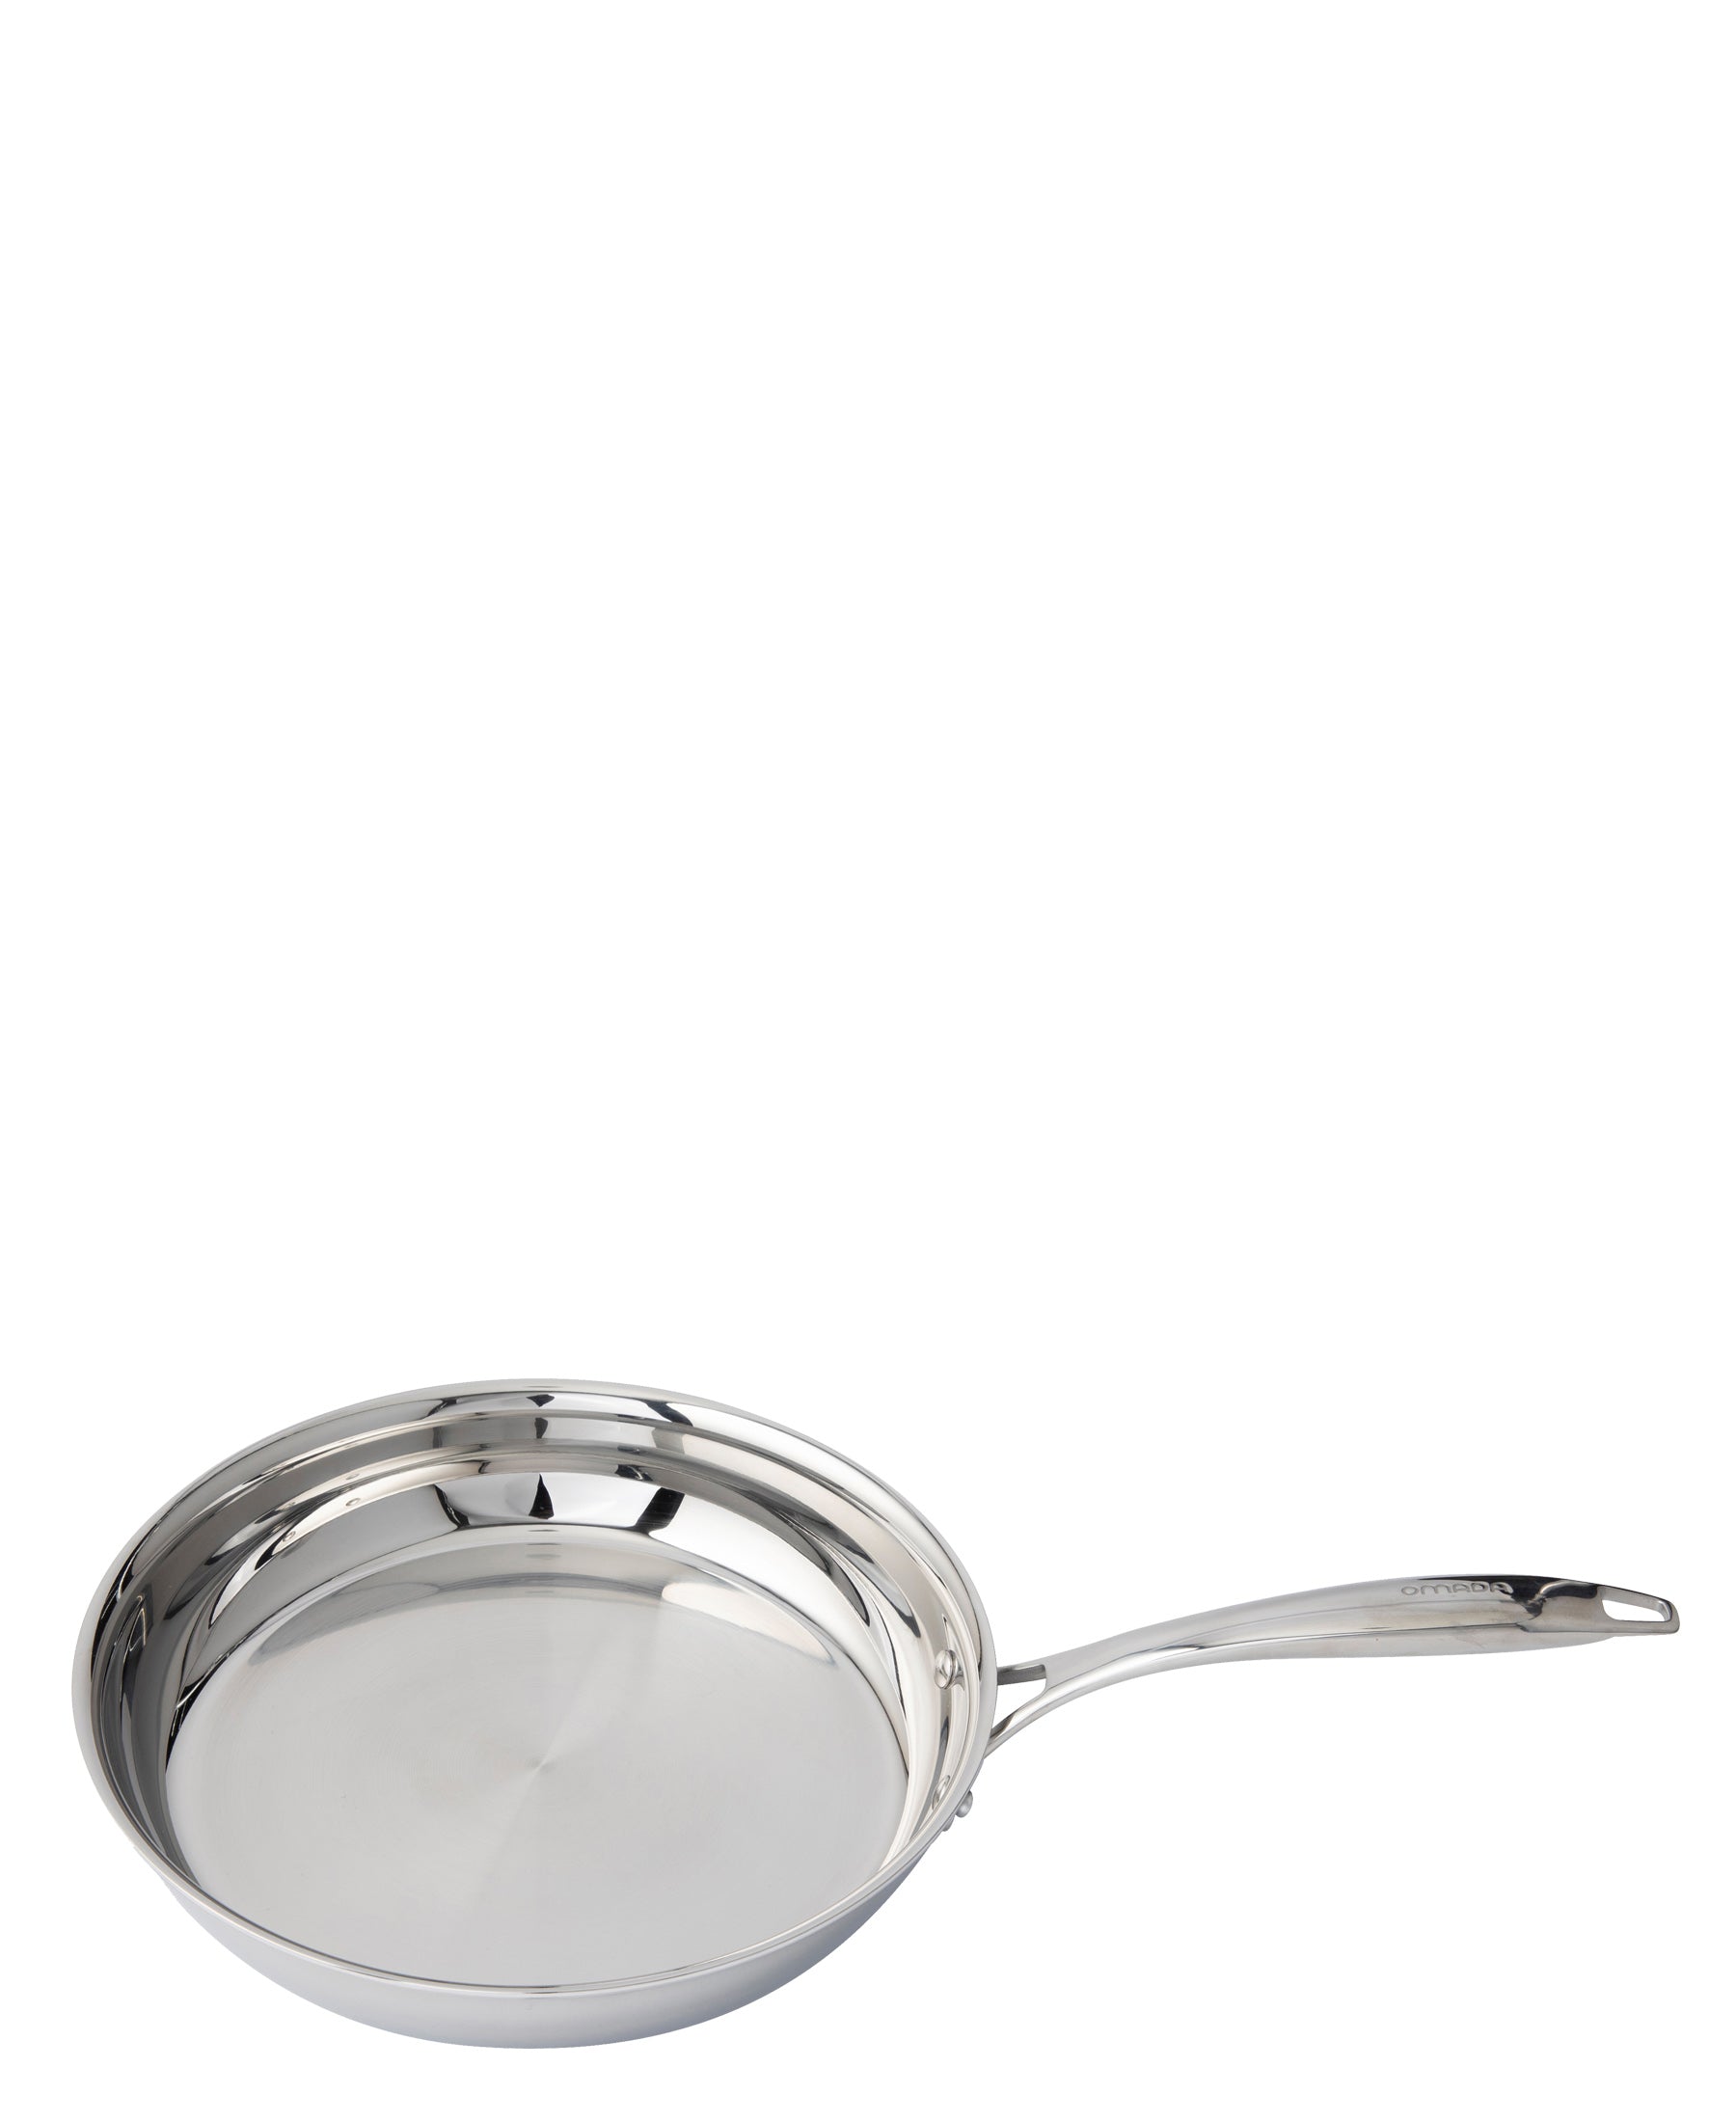 Omada 30cm Fry Pan With No Coating - Silver